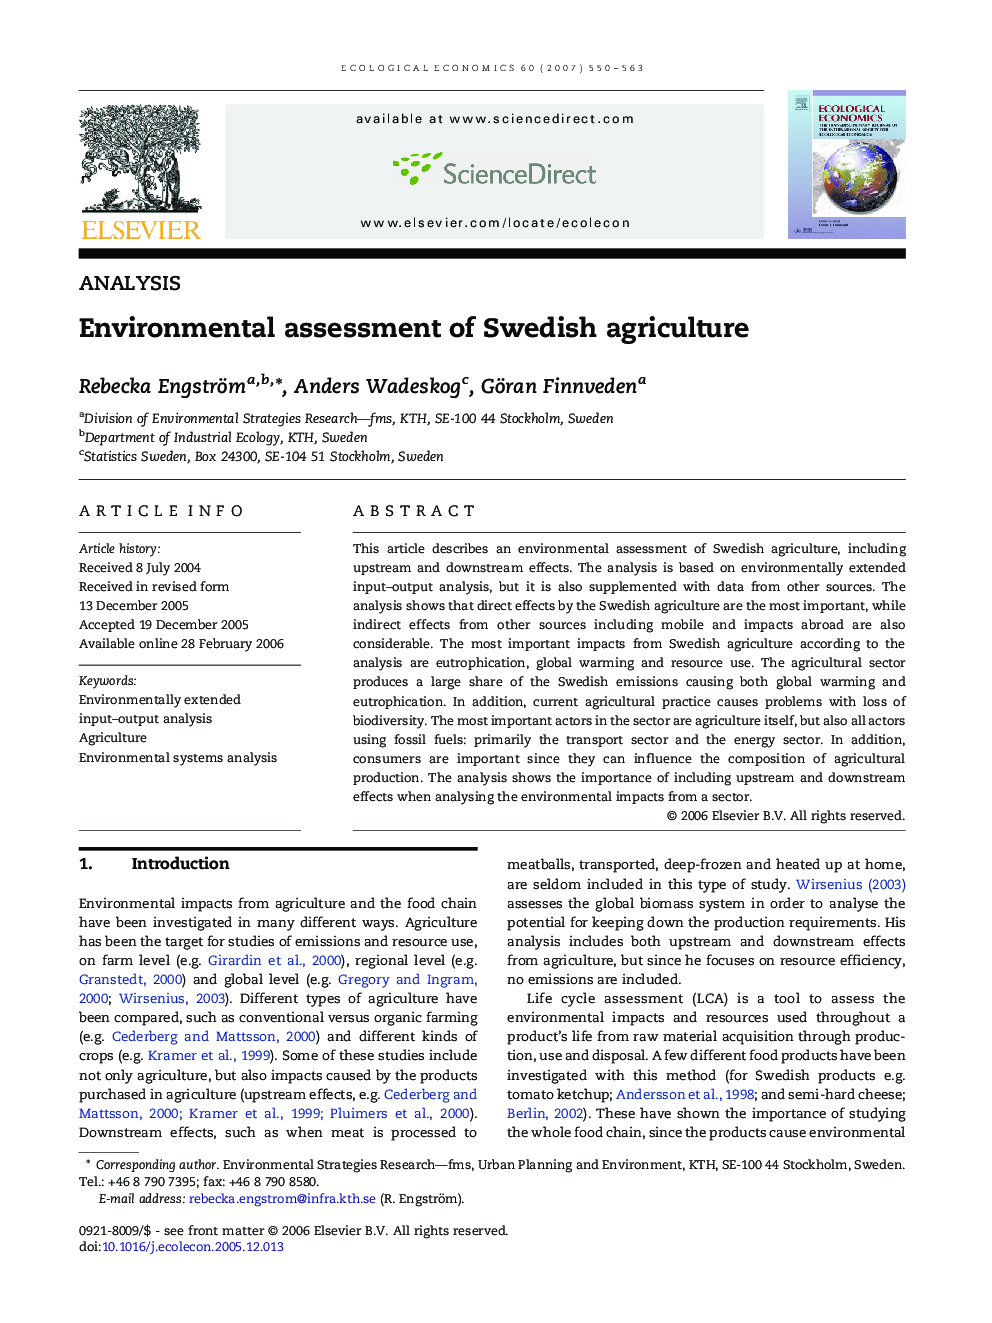 Environmental assessment of Swedish agriculture